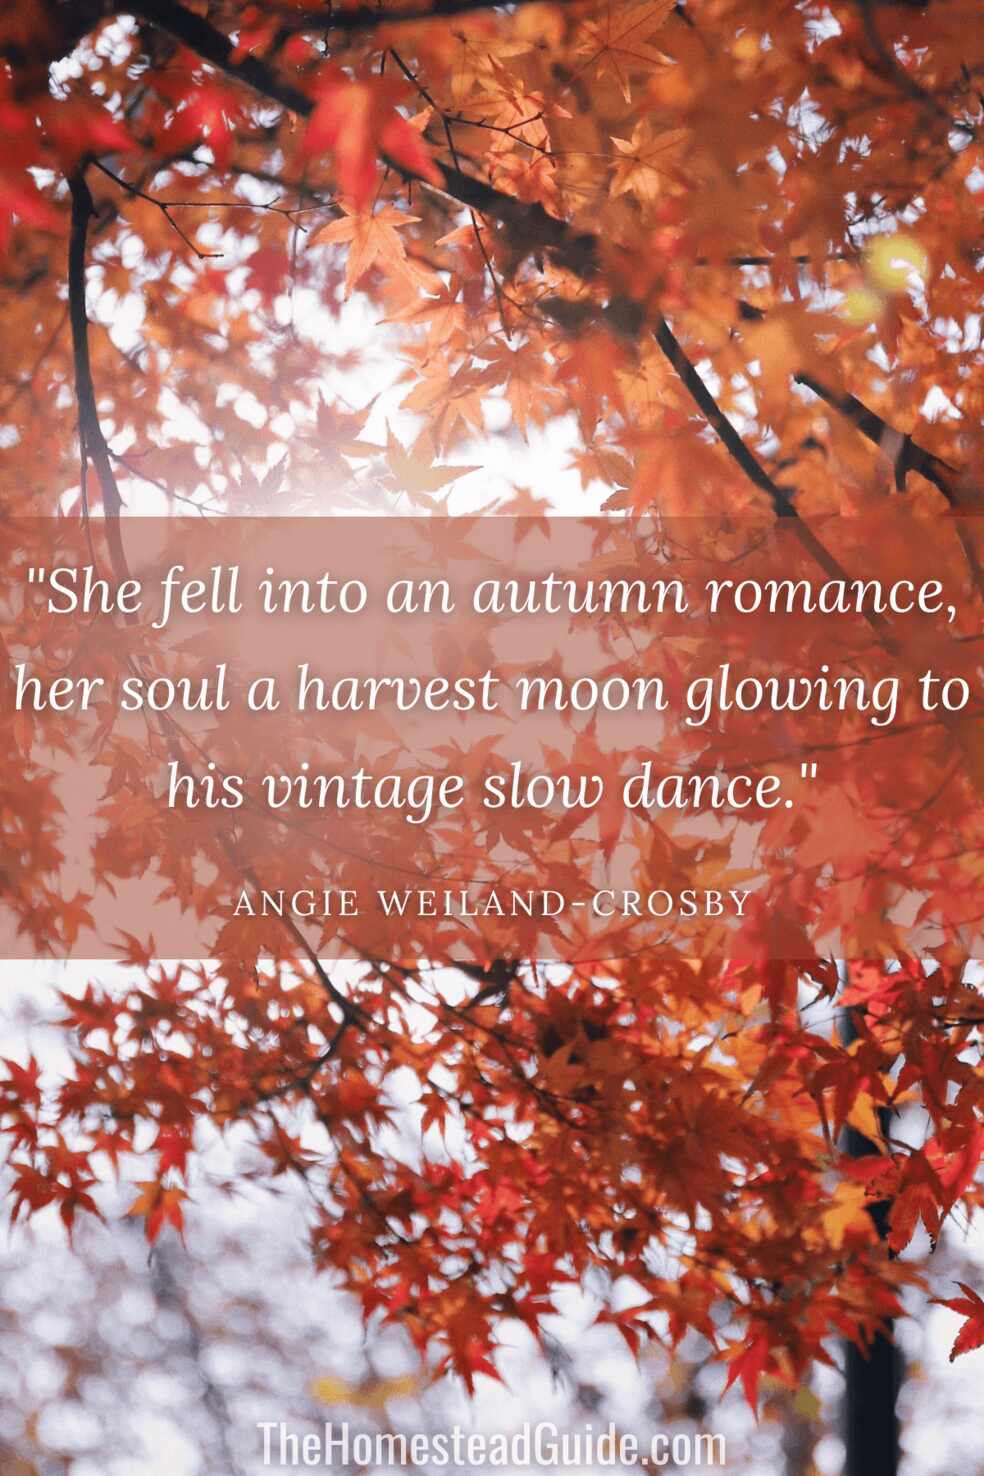 She fell into an autumn romance, her soul a harvest moon glowing to his vintage slow dance. 